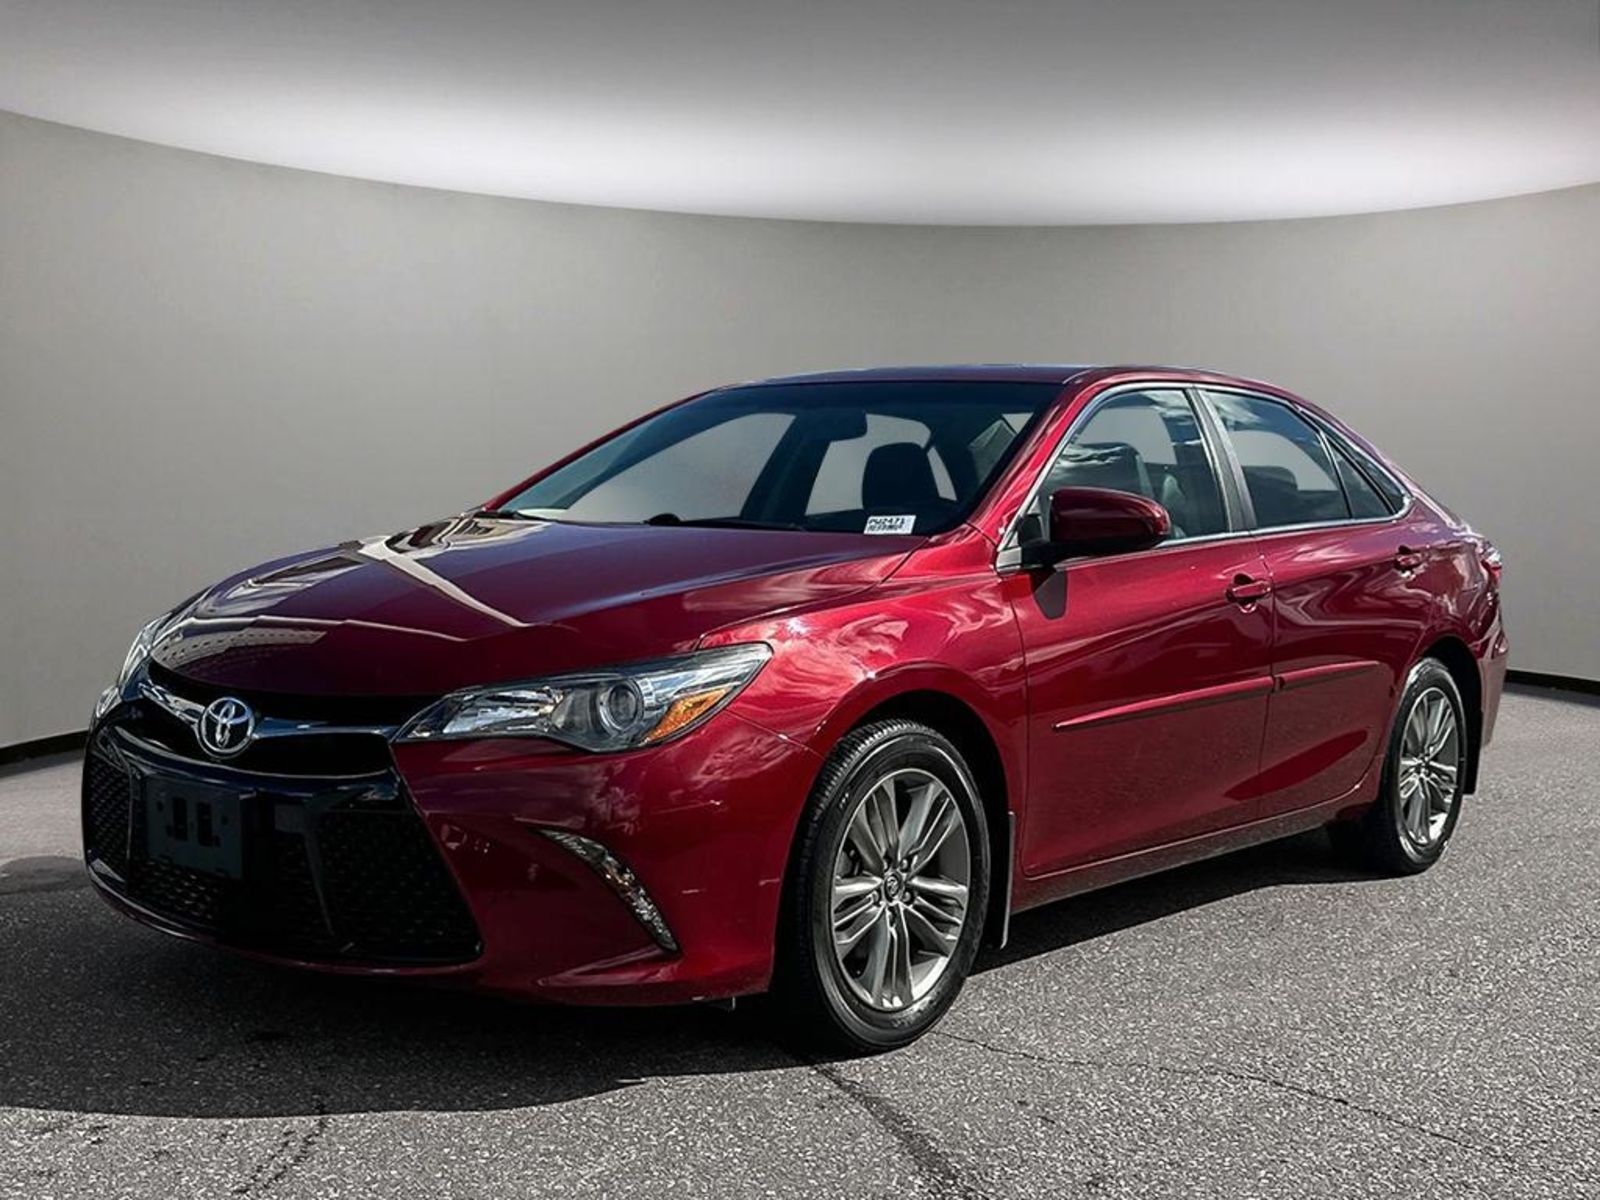 2015 Toyota Camry SE - Low Kms / Rear View Cam / Cruise Control / No